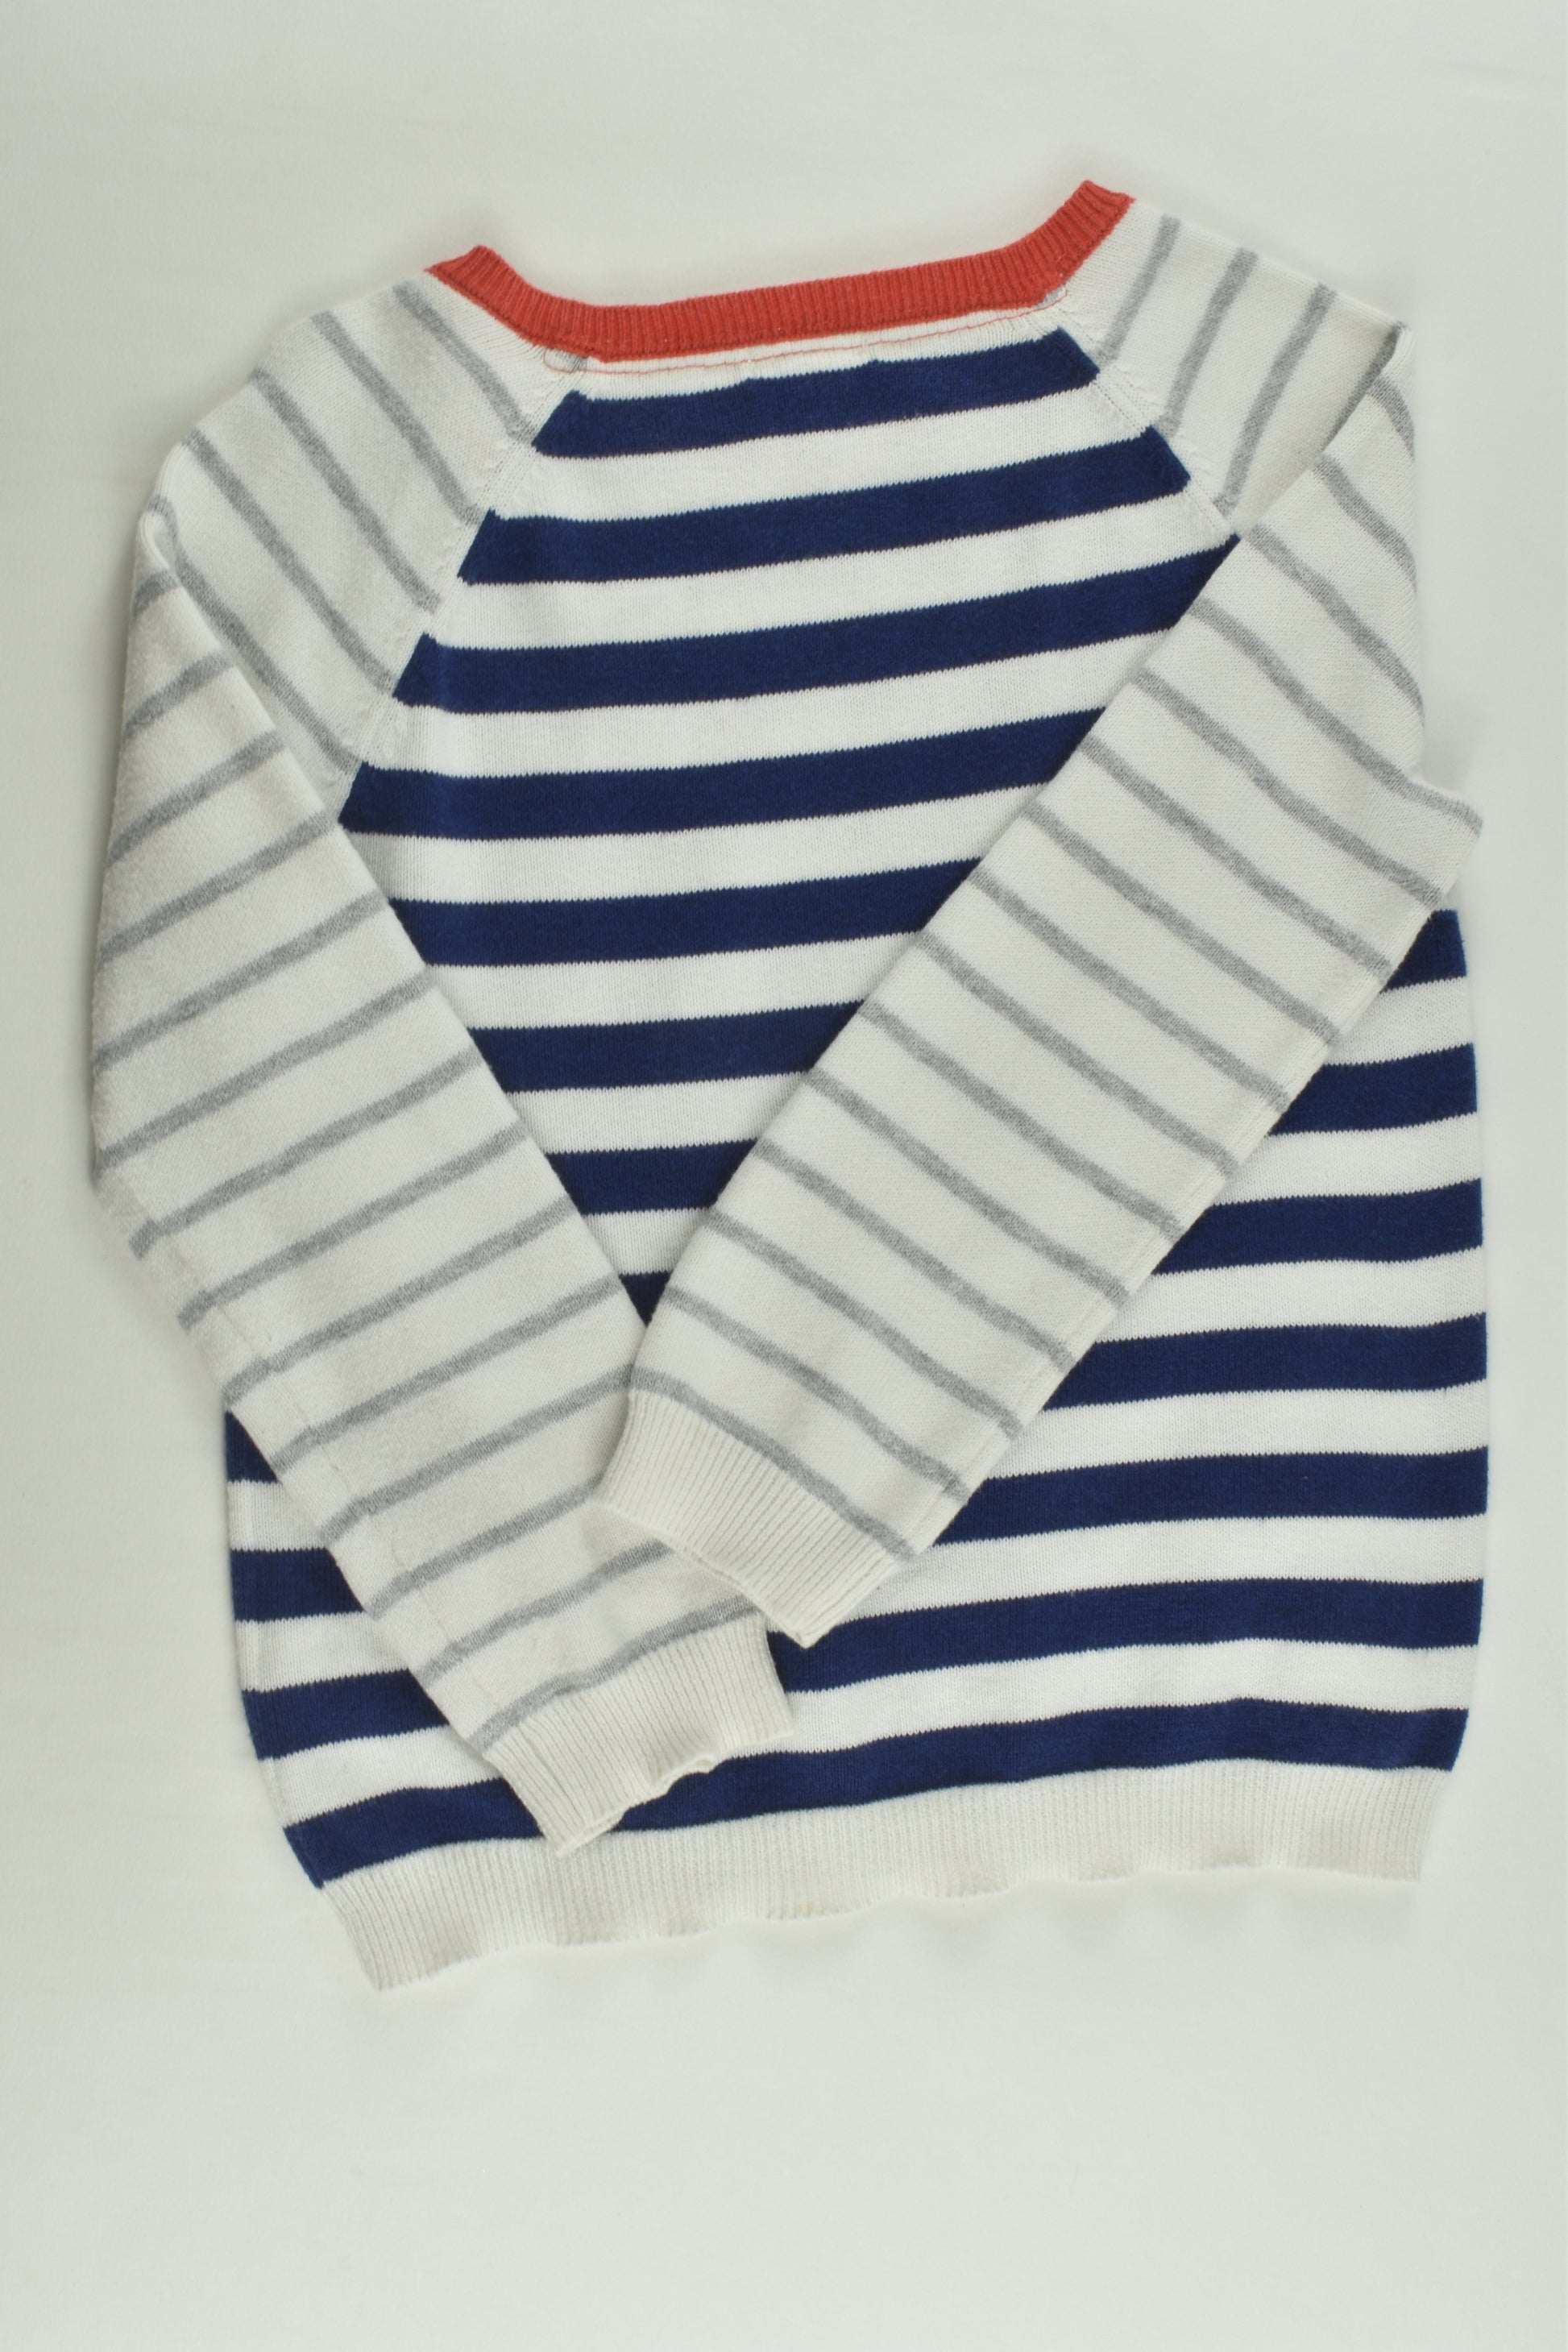 Purebaby Size 3 Striped Knitted Jumper